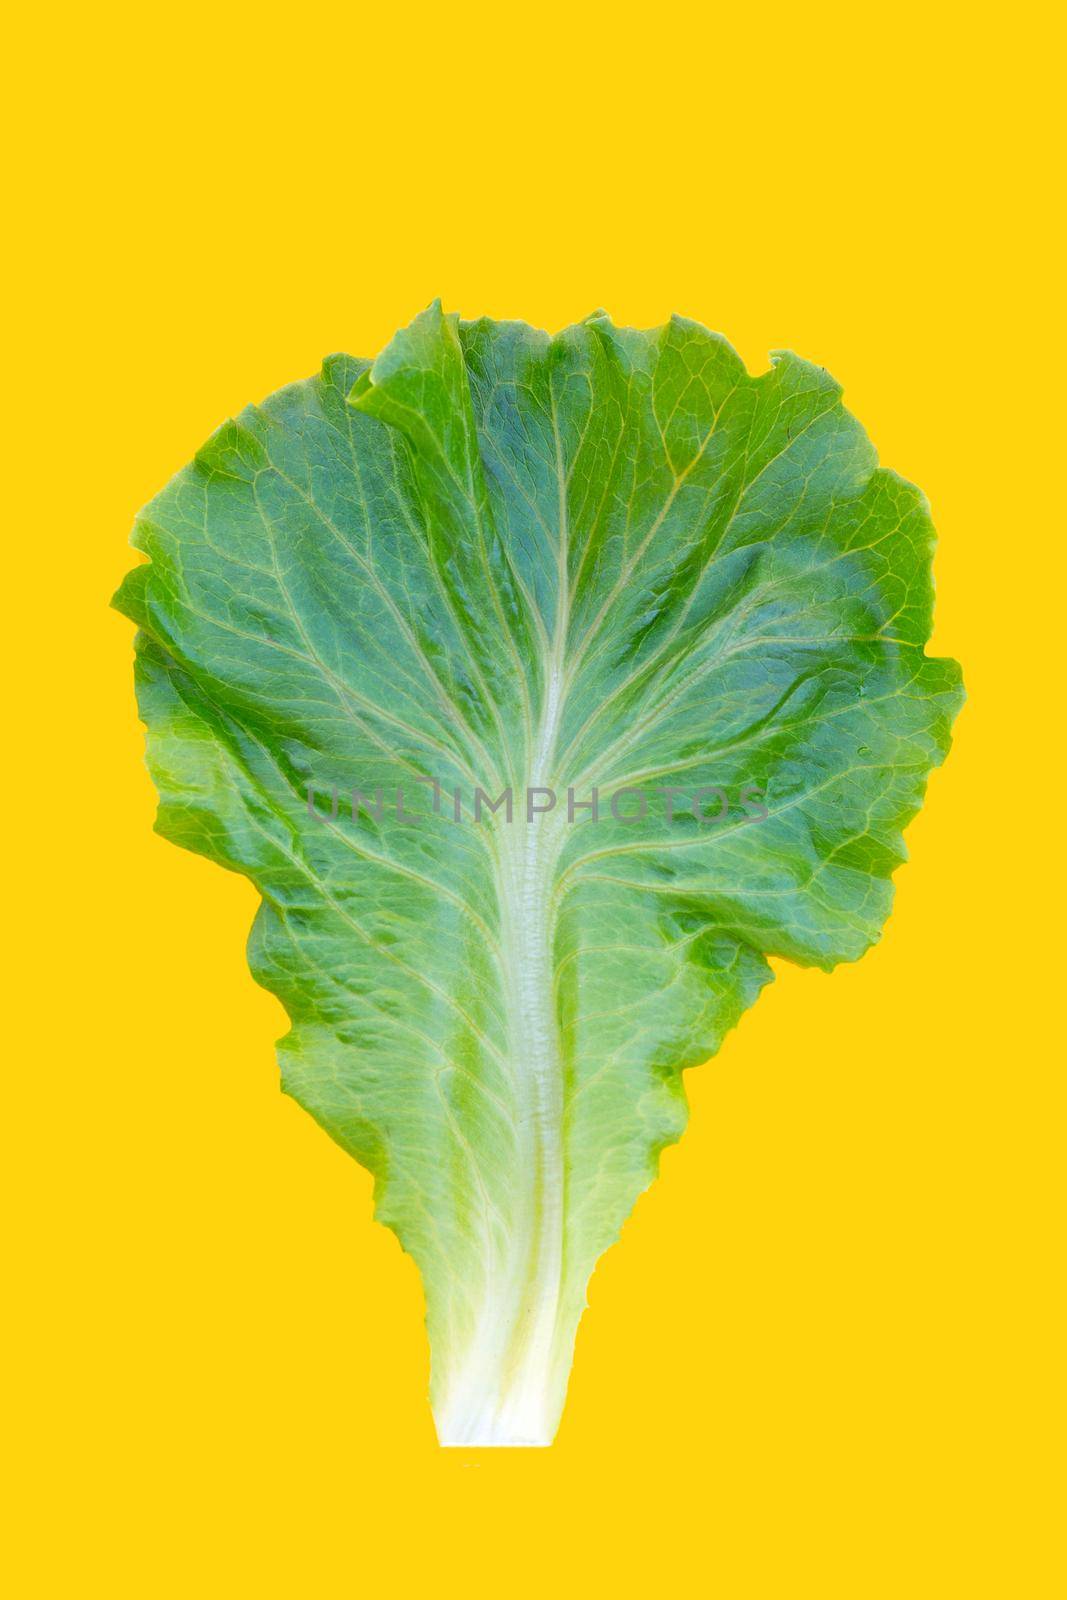 Lettuce leaf on yellow background. by Bowonpat